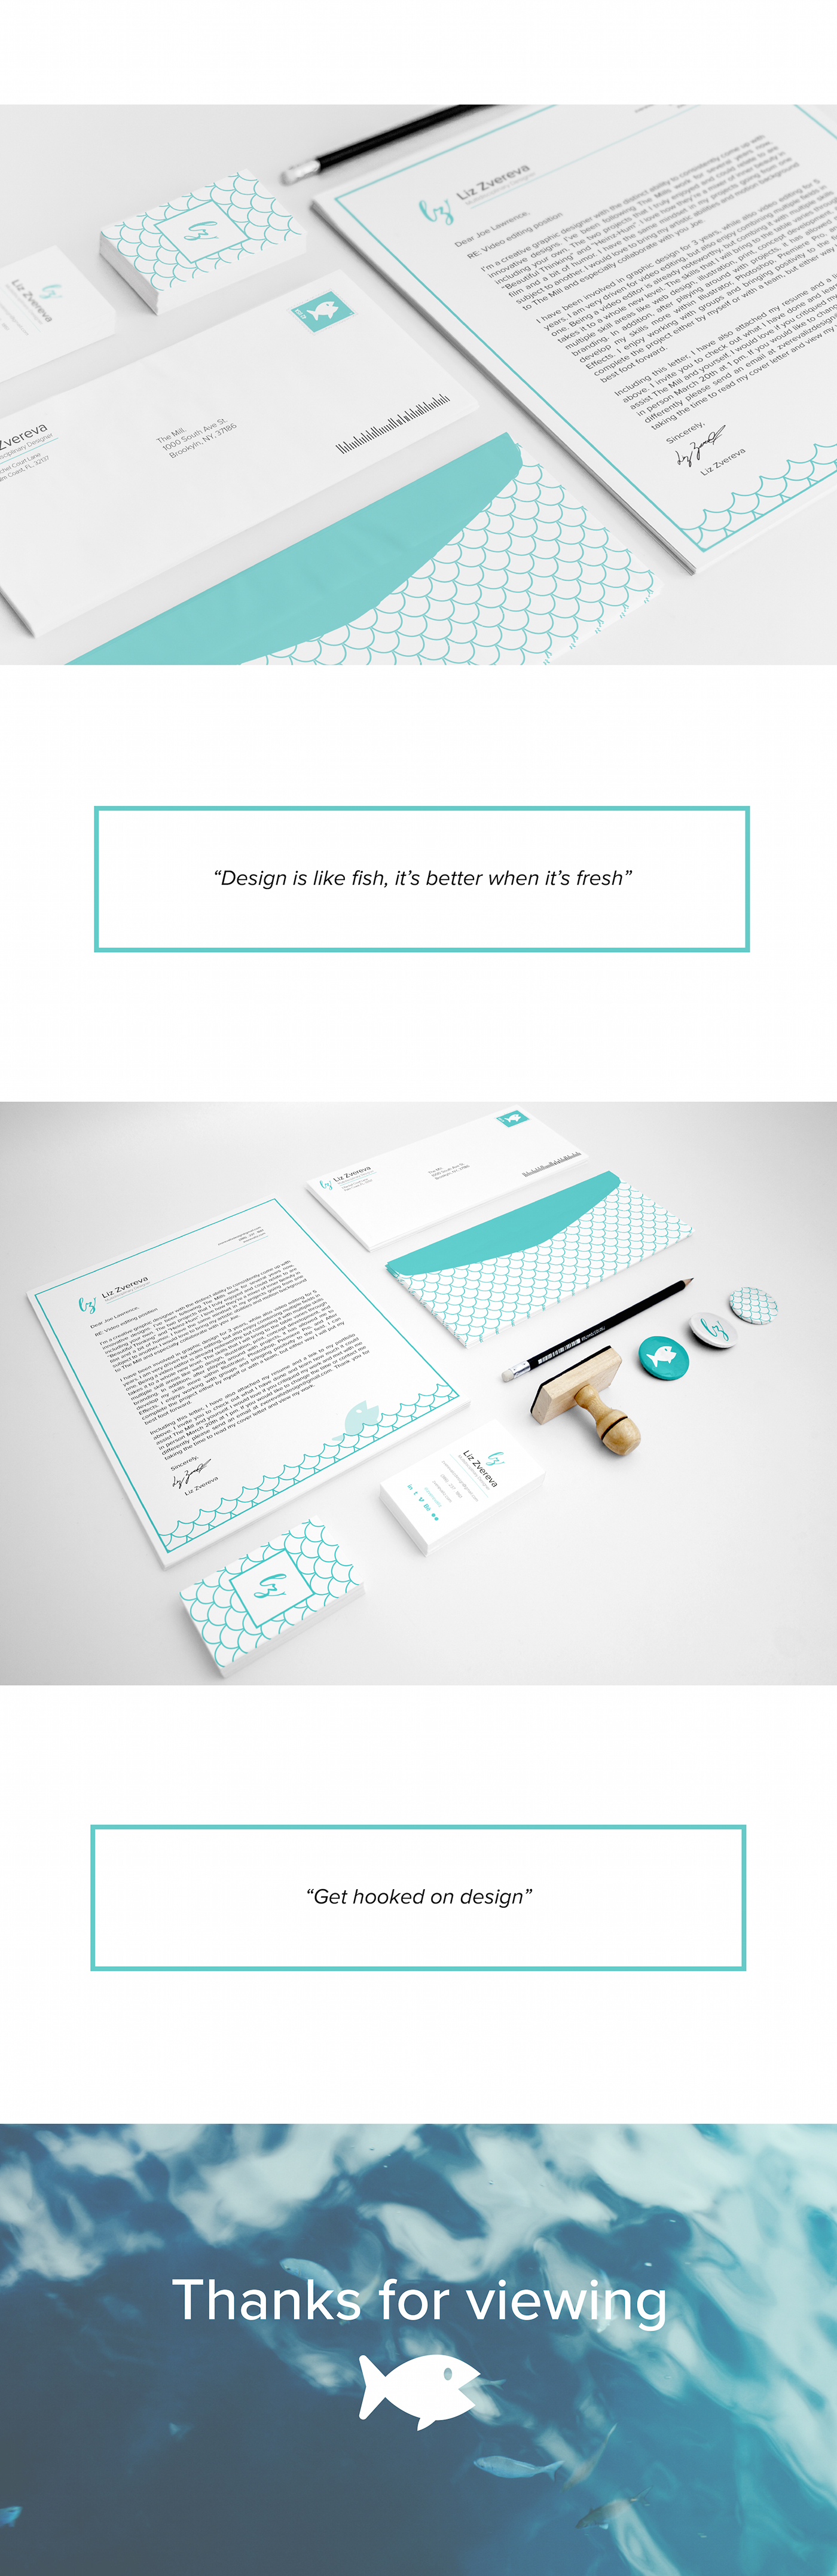 DADBS DGS march2016 Digital Studio Personal Brand identity research fish Ocean Stationery logo Resume invoice